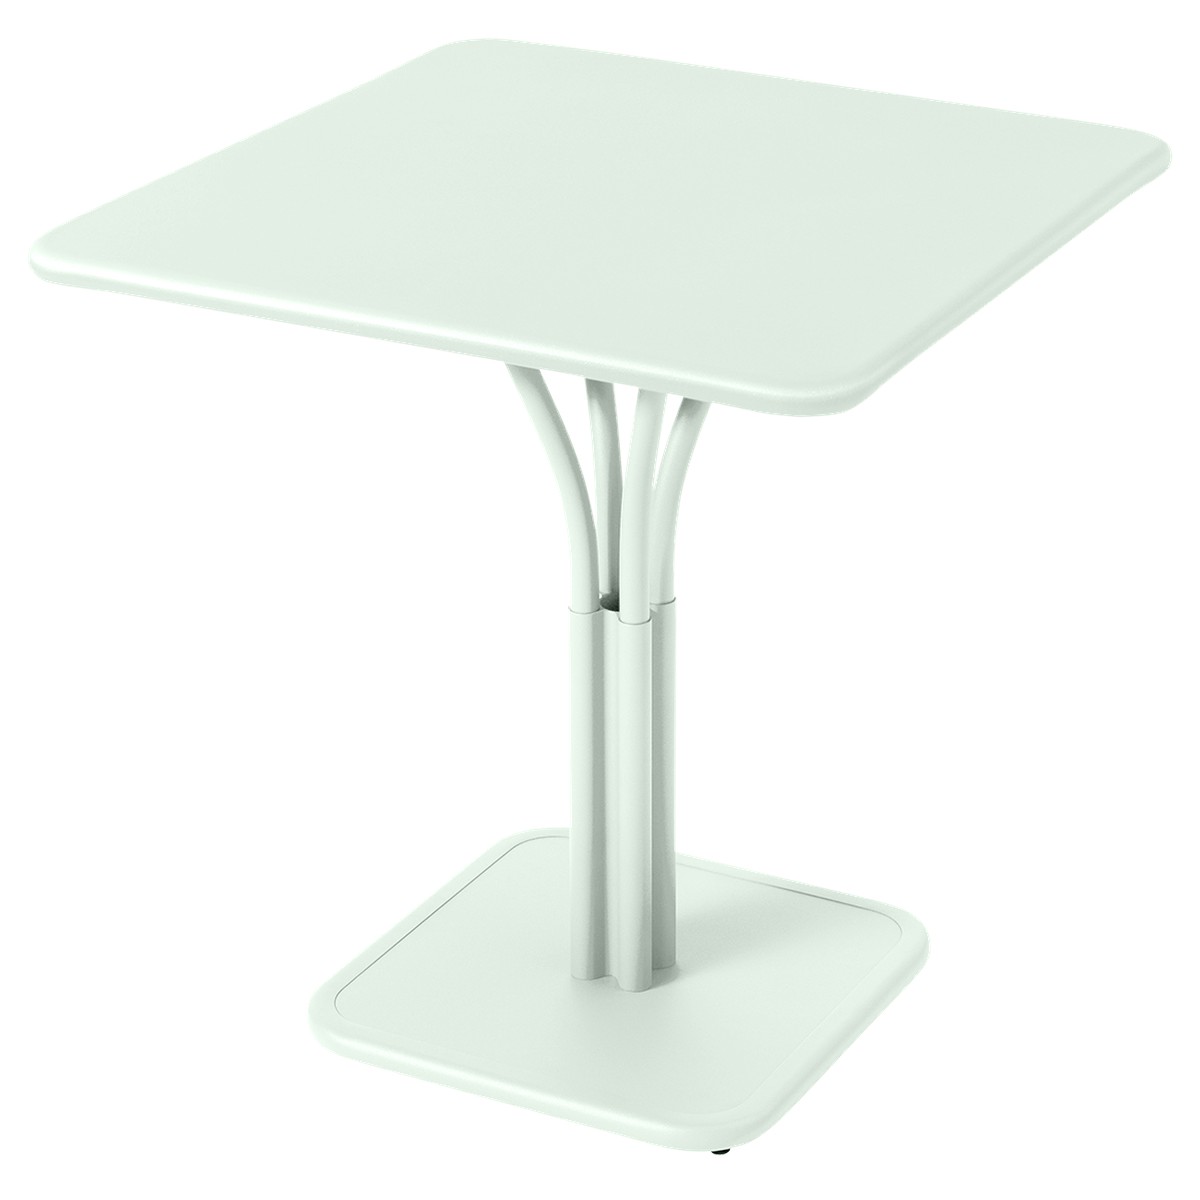 Fermob Luxembourg Table Luxembourg carrée pied central Bleu cyan clair L 71 x l 71 x H74cm